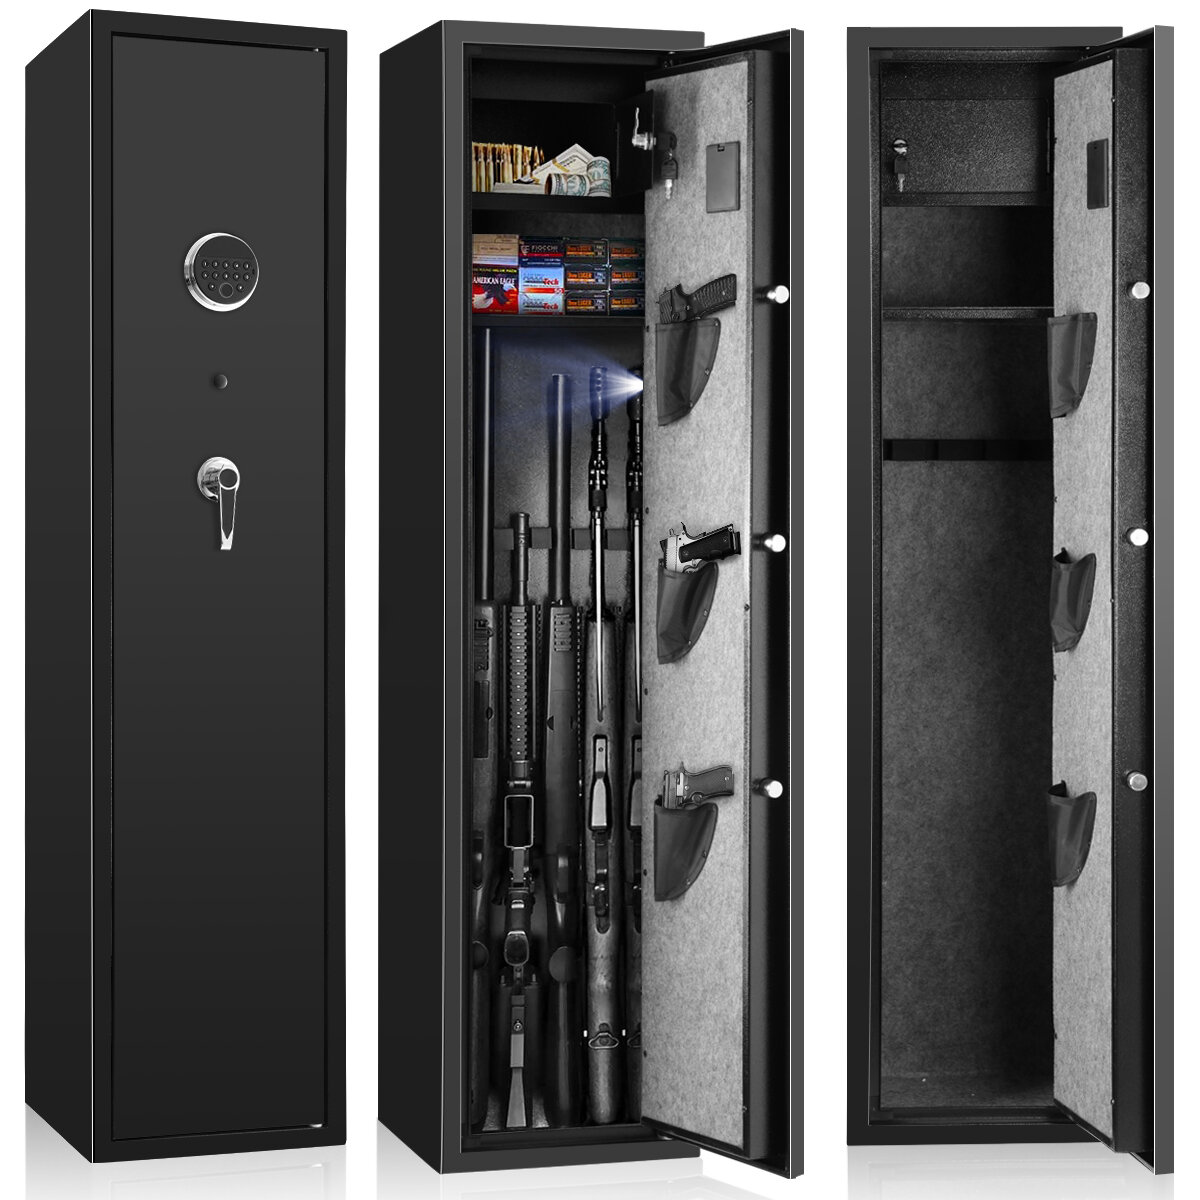 Safe Quick Access 5 Long Gun Safe Cabinet for Pistol and Home With Removable Storage Shelf for Jewelry/Valuables